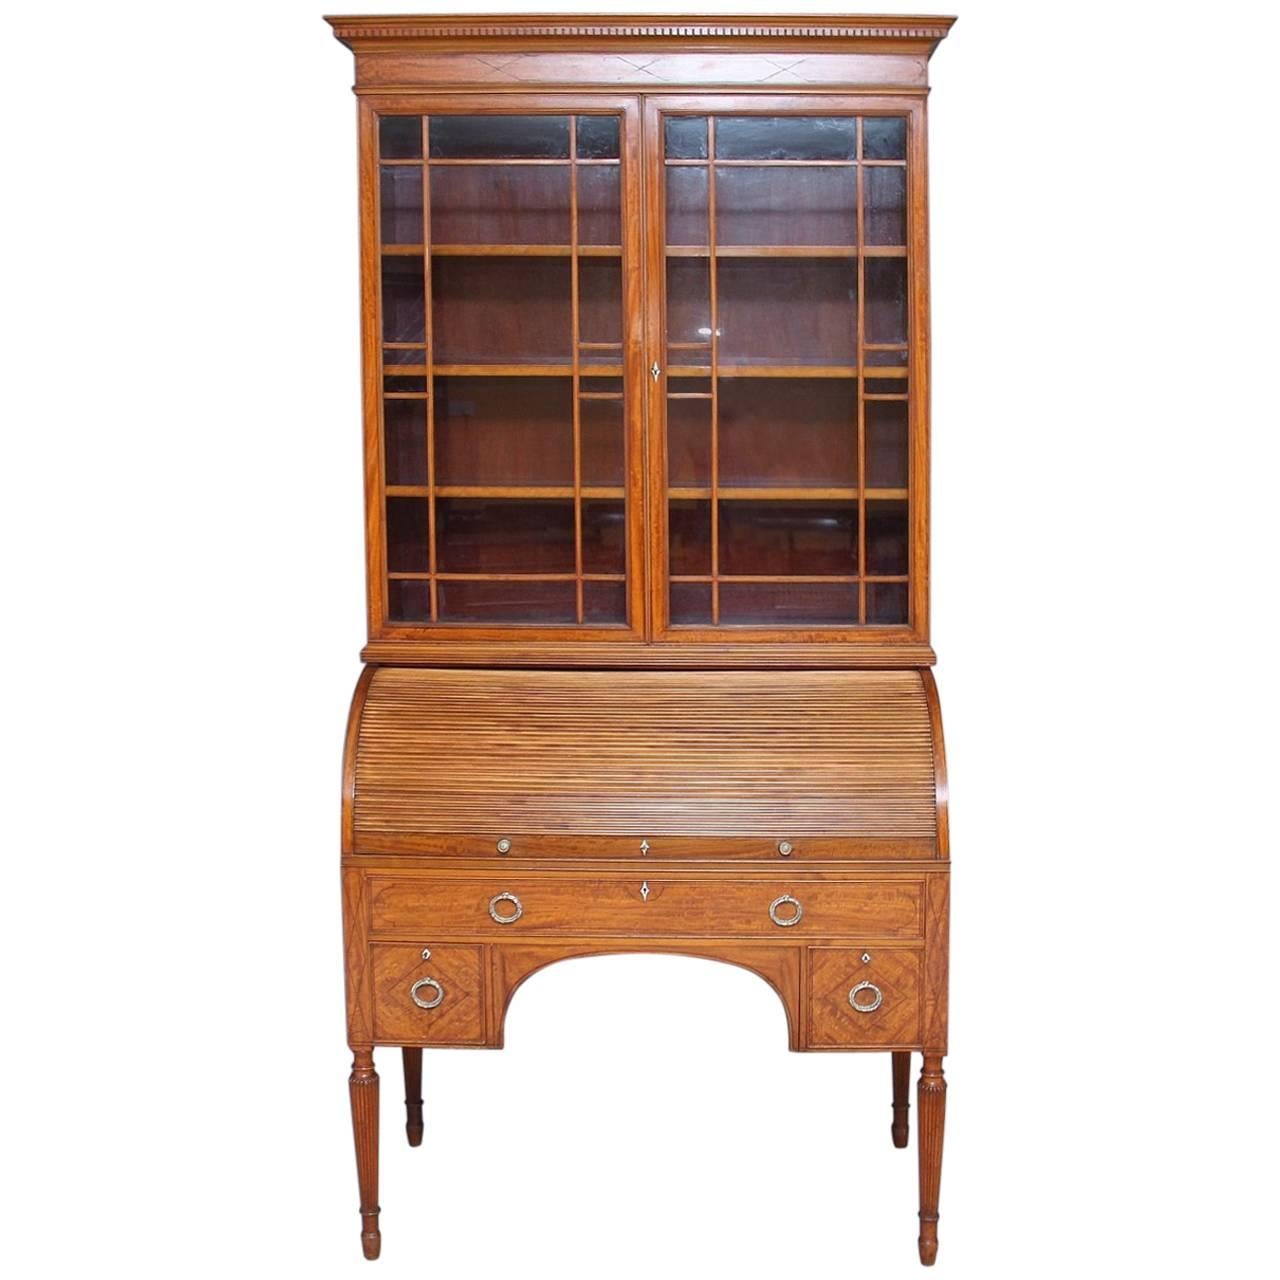 19th Century Satinwood Cylinder Bookcase by "Edwards & Roberts"